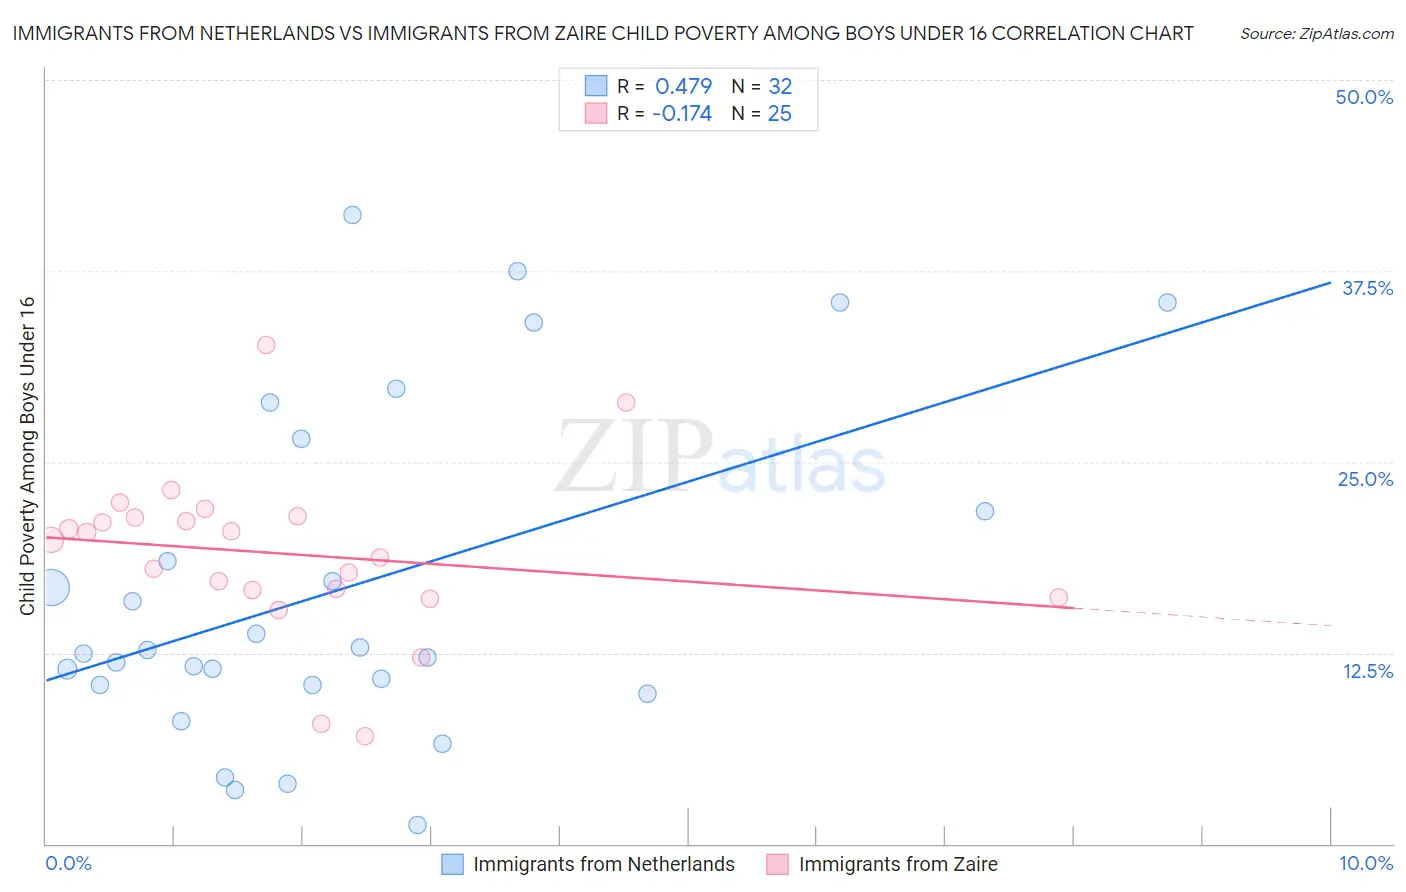 Immigrants from Netherlands vs Immigrants from Zaire Child Poverty Among Boys Under 16